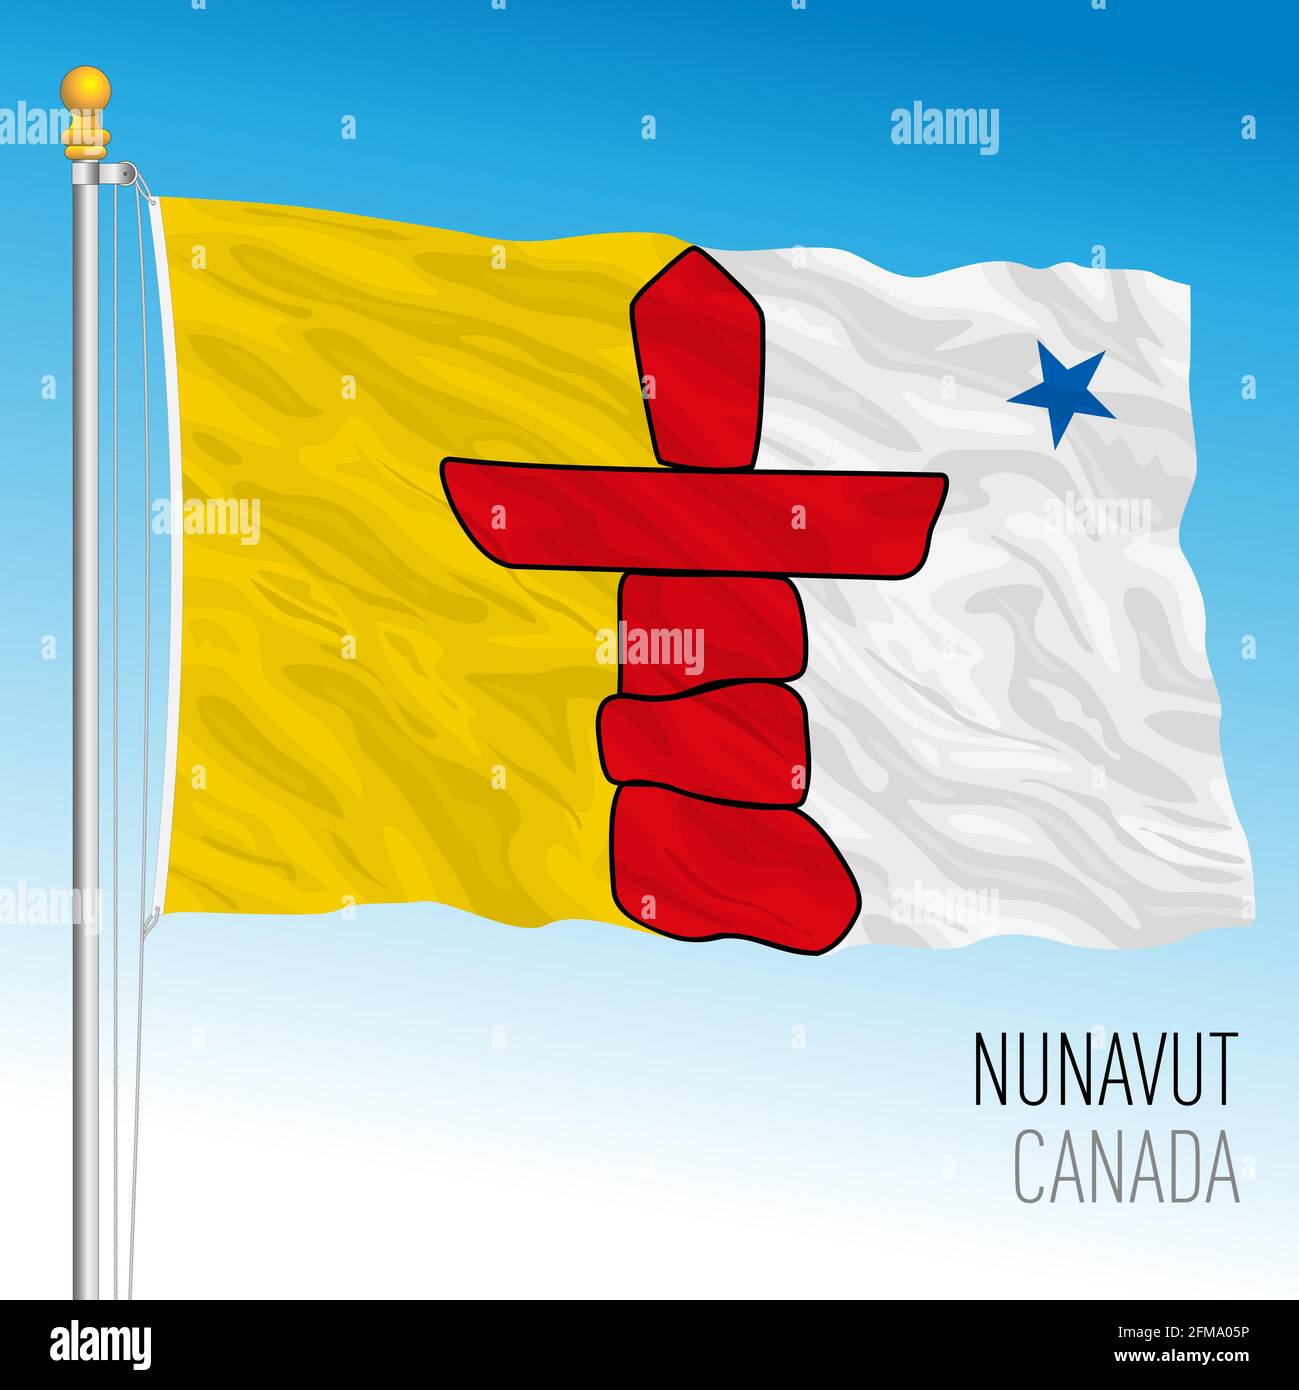 Nunavut territorial and regional flag, Canada, north american country, vector illustration Stock Vector